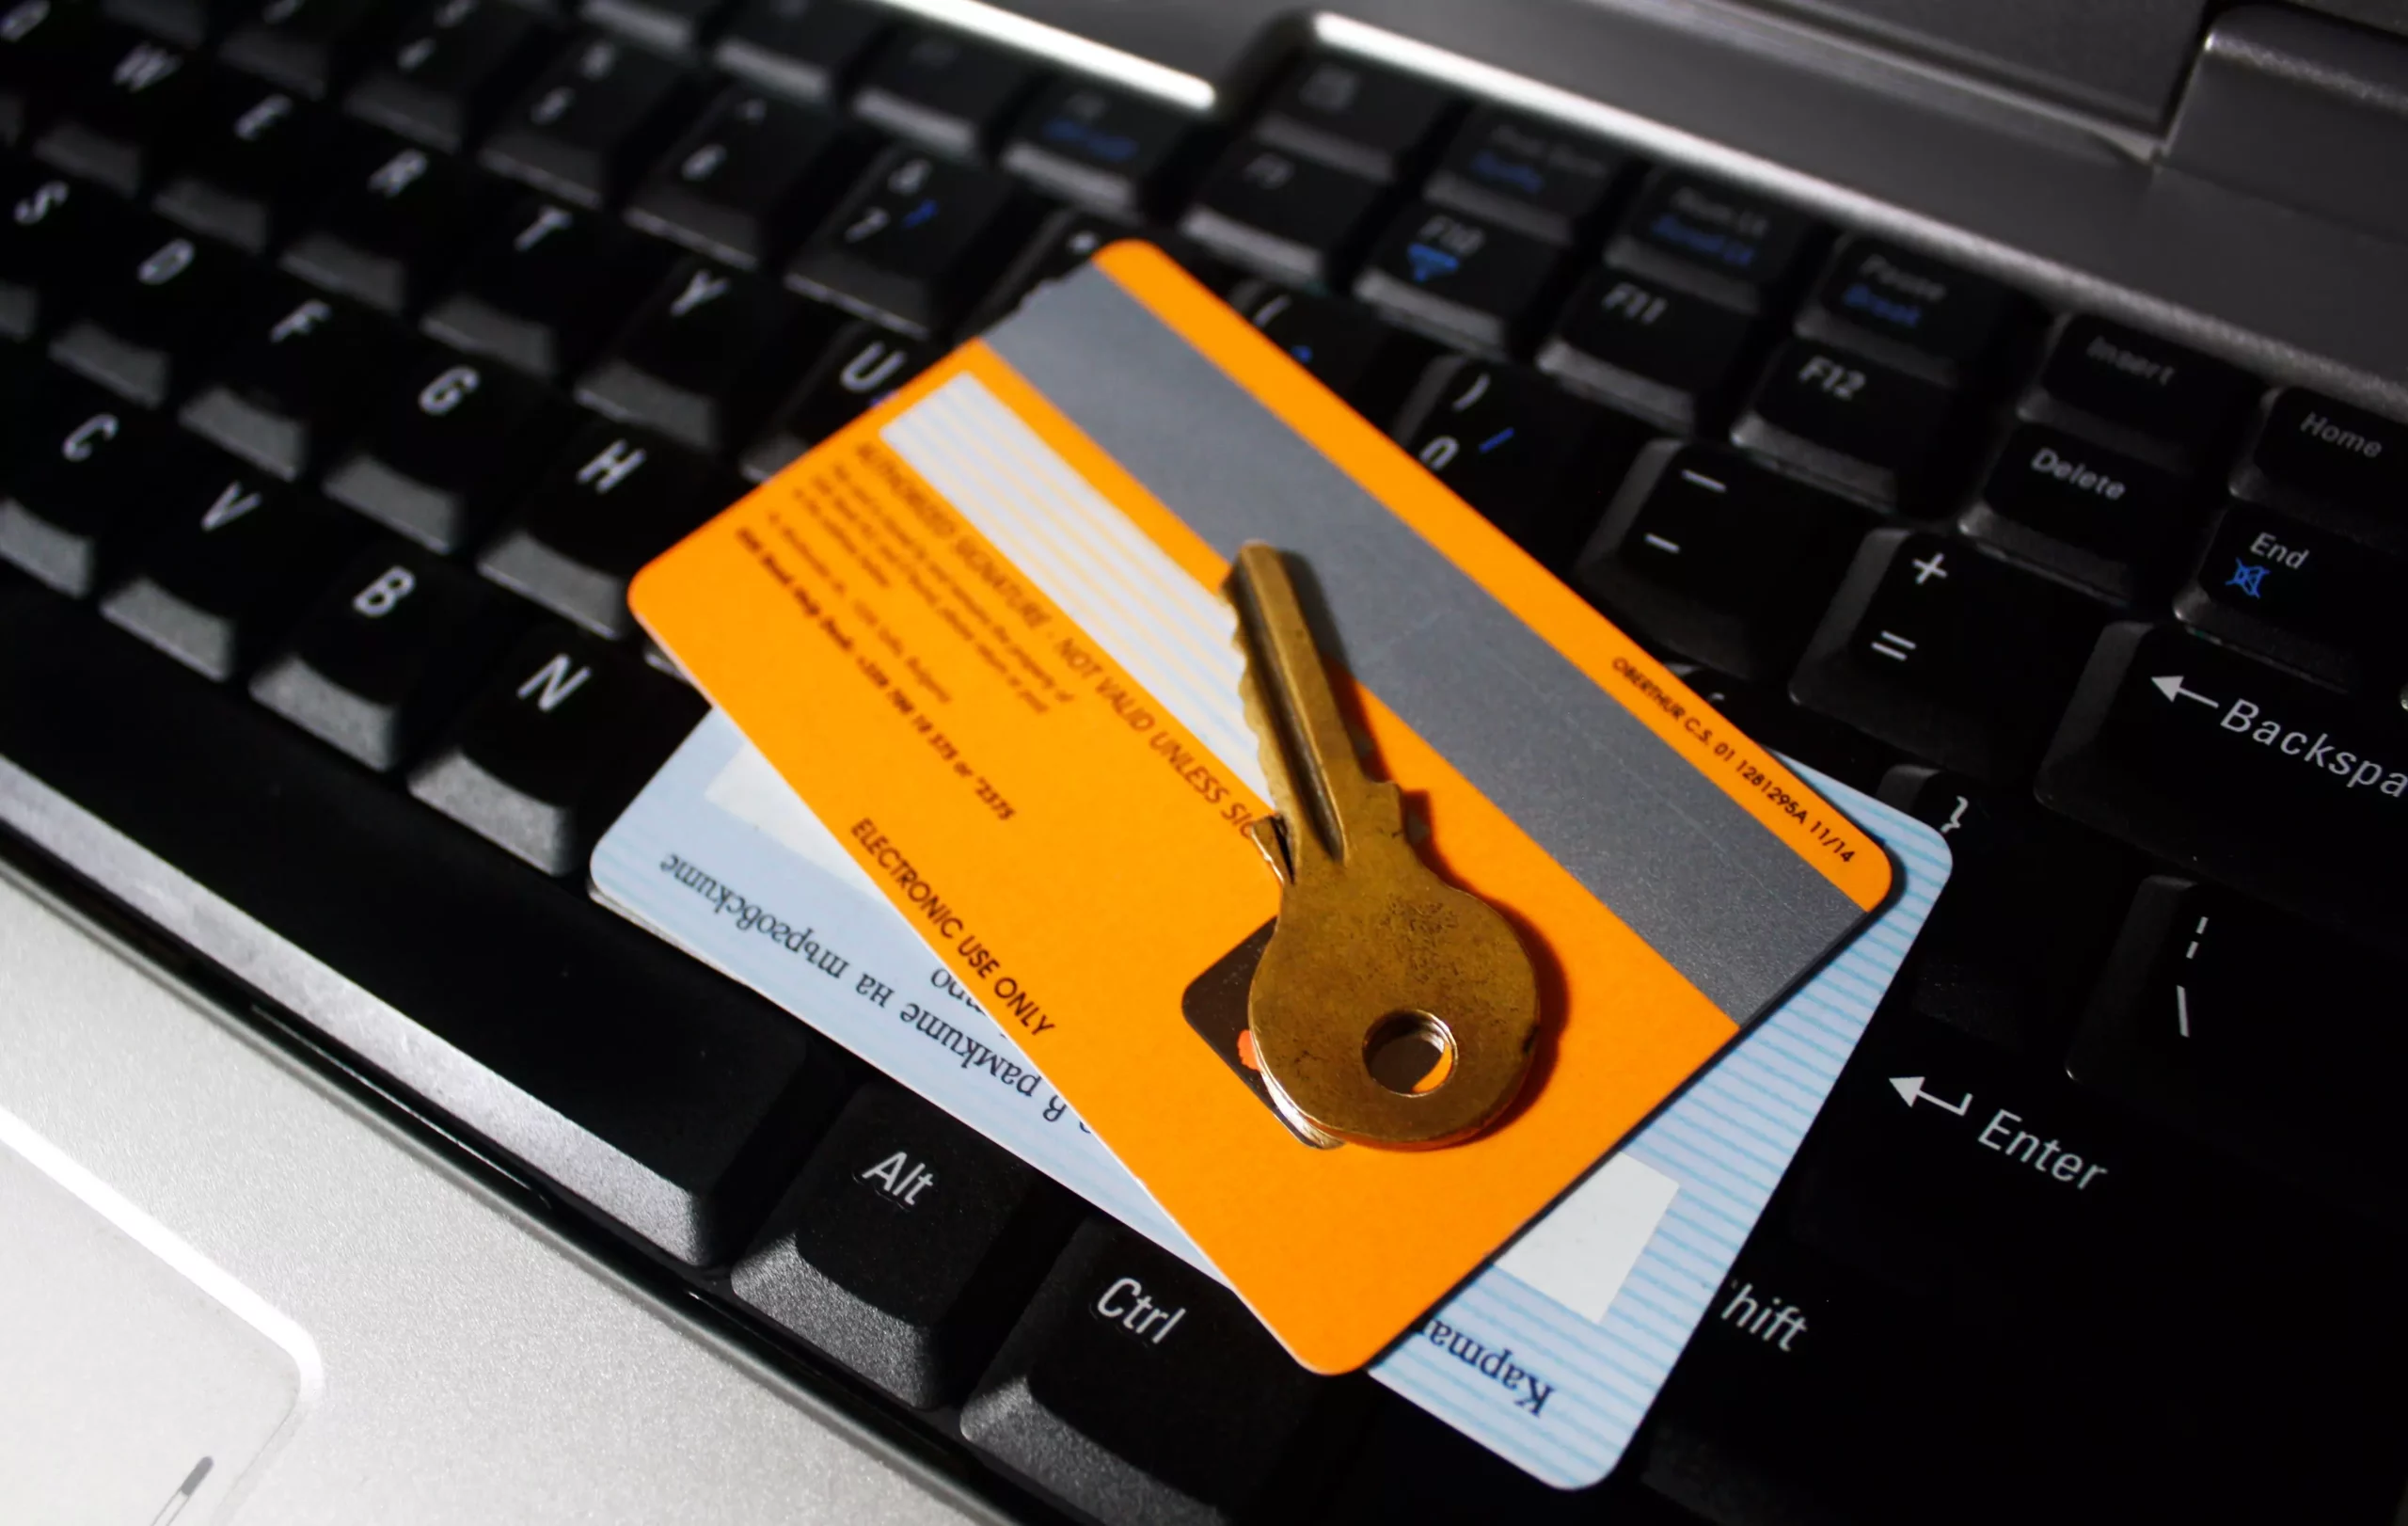 Digital banking security represented by cards and a key.